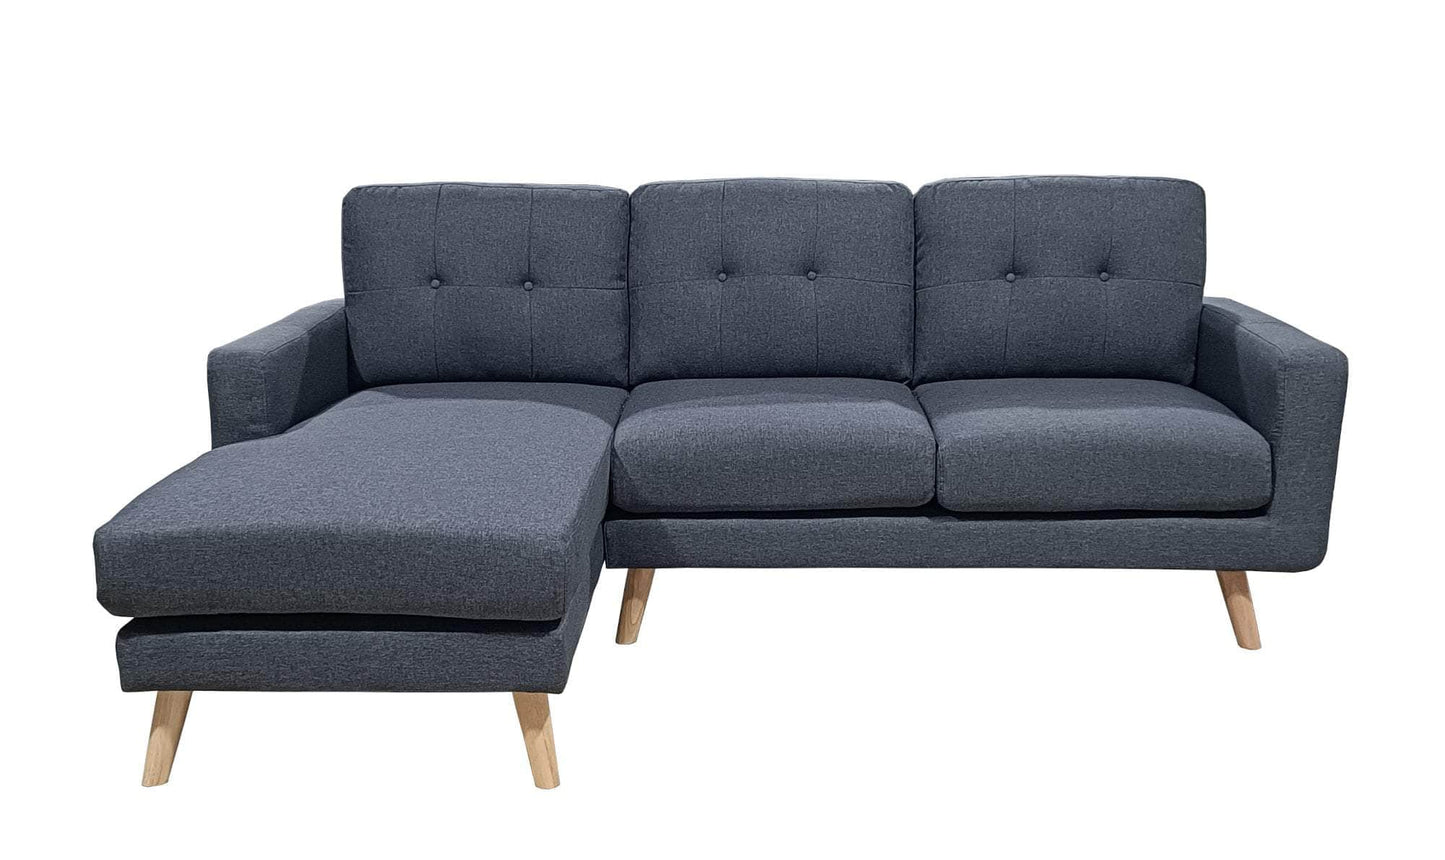 Urban Cali Sectional Dark Grey / Left Facing Chaise San Marino 87.75" Wide Tufted Linen Sectional Sofa - Available in 2 Colours